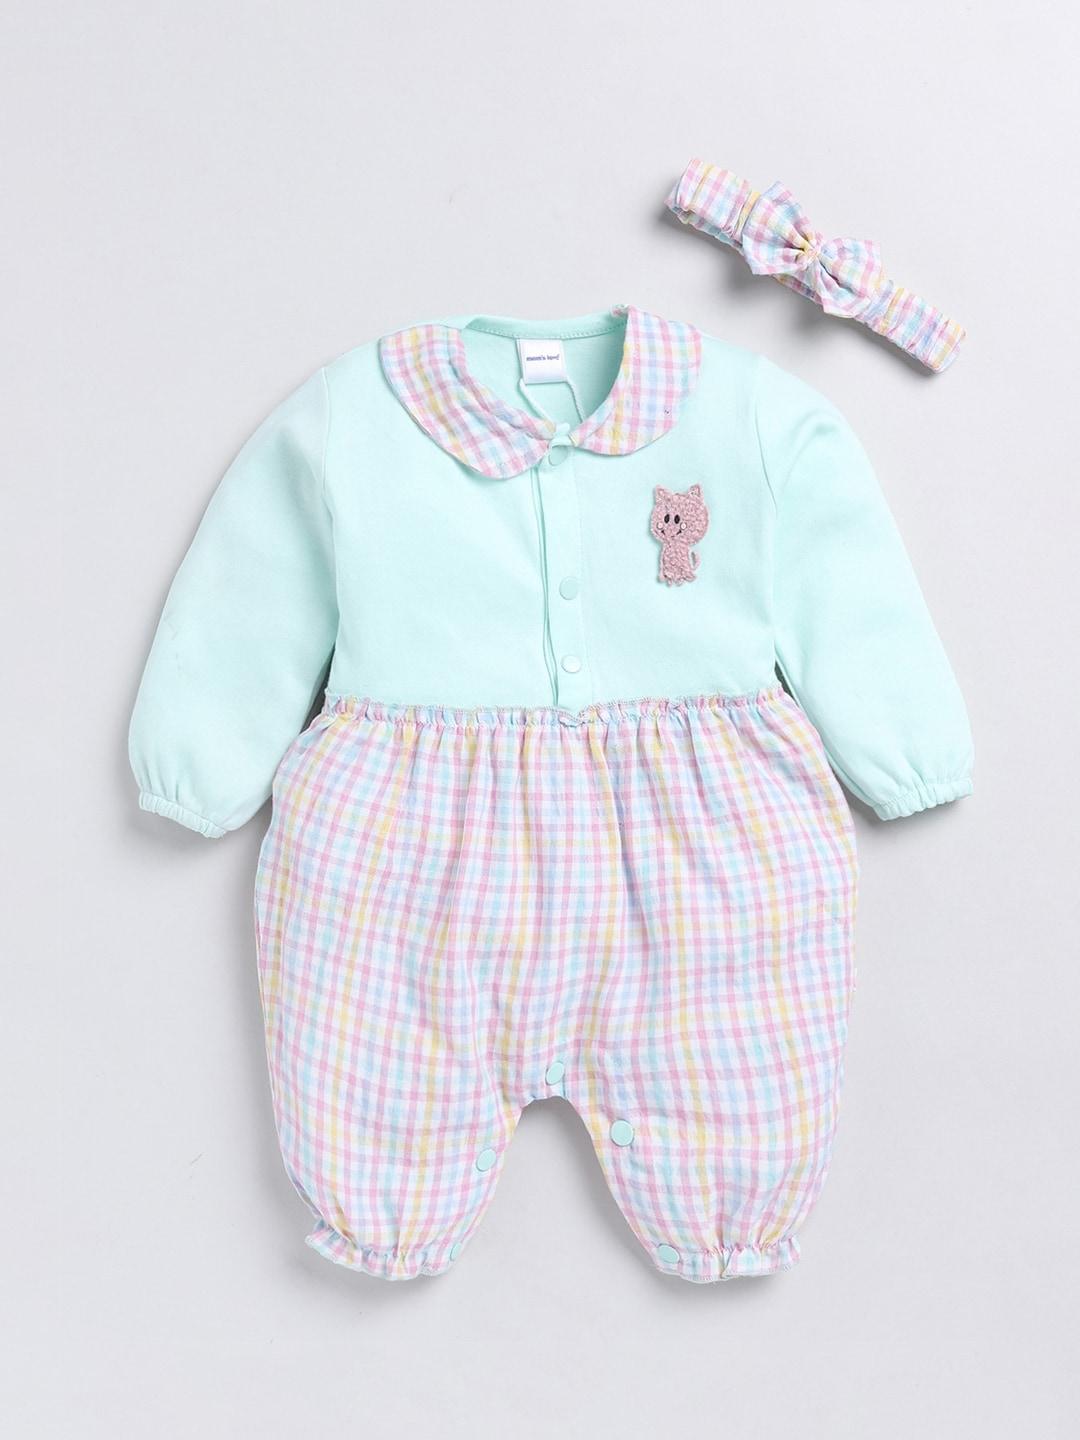 Moms Love Infant Girls Striped Cotton Rompers With Hair Band